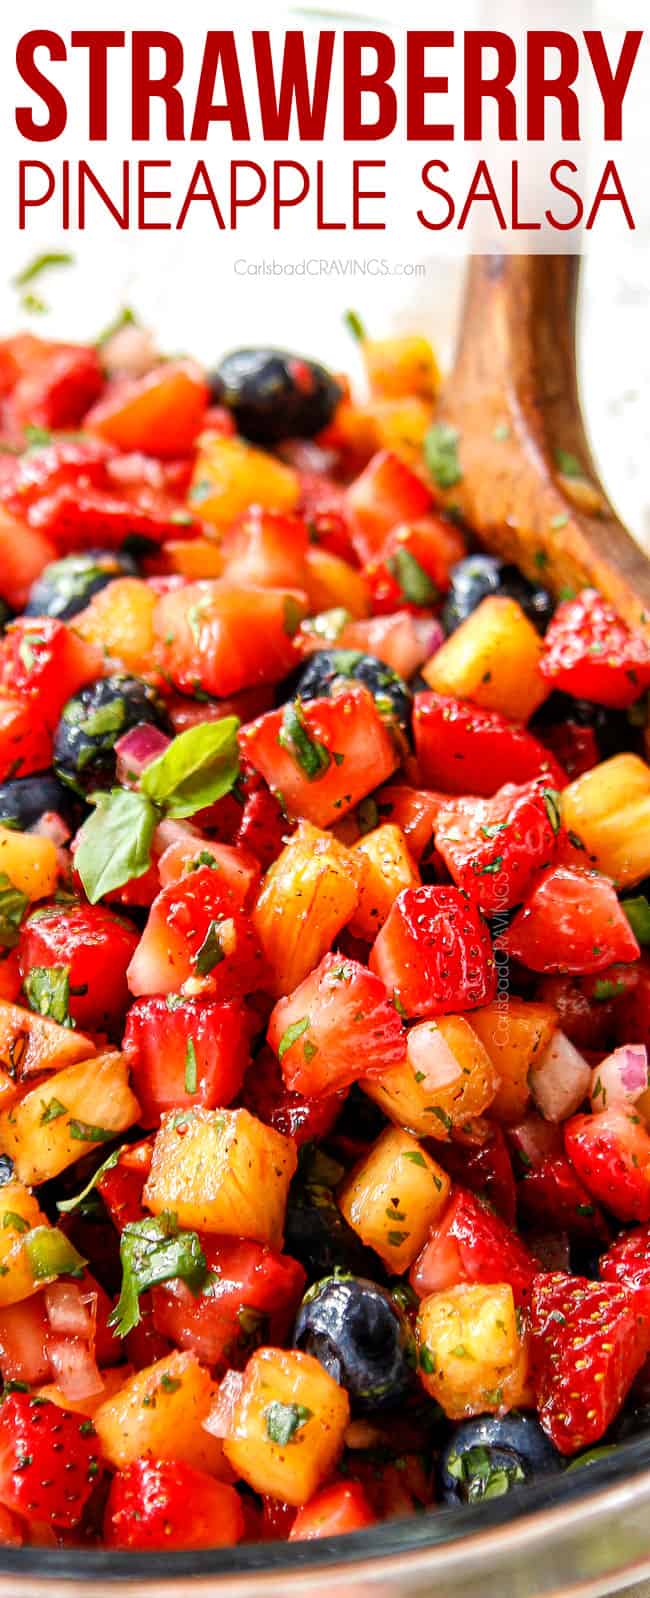 up close showing how to make strawberry salsa by tossing strawberries, pineapples, cilantro, red onions and cilantro together with a wooden spoon 